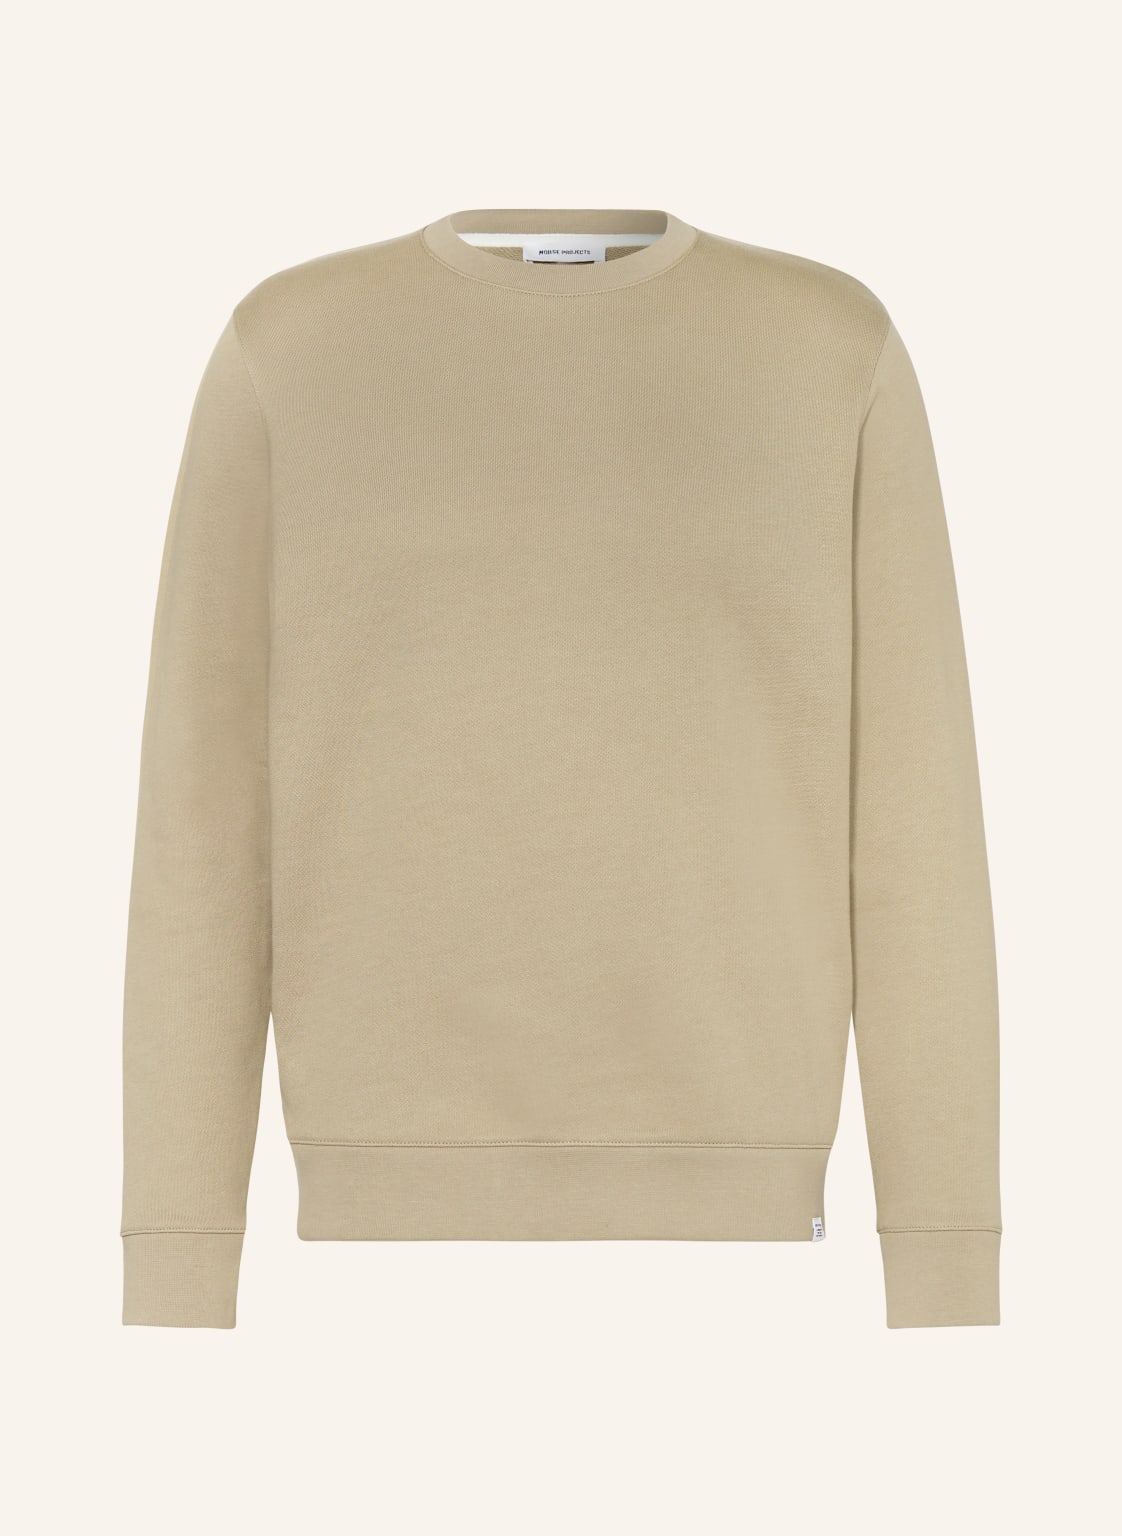 Norse Projects Sweatshirt beige von Norse Projects